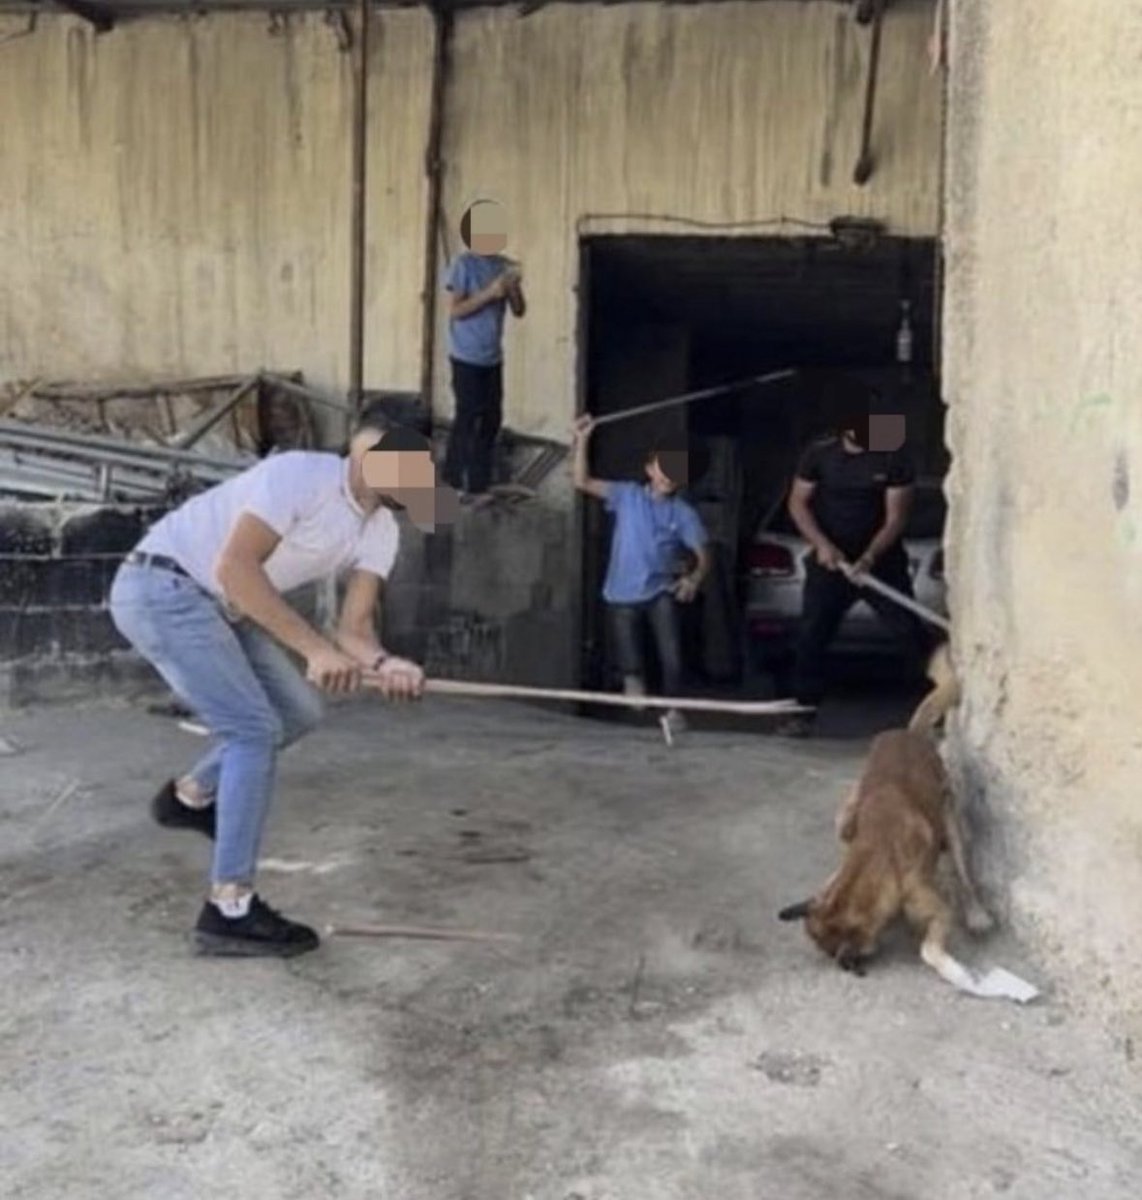 In 2018, the Mayor of Hebron, a Palestinian city in the West Bank with a population of 220,000 offered Palestinians $5 for killing dogs. The mayor told Palestinians to kill as many dogs as possible and offered a $25 reward for killing 5 dogs. Thousands of dogs were then shot…